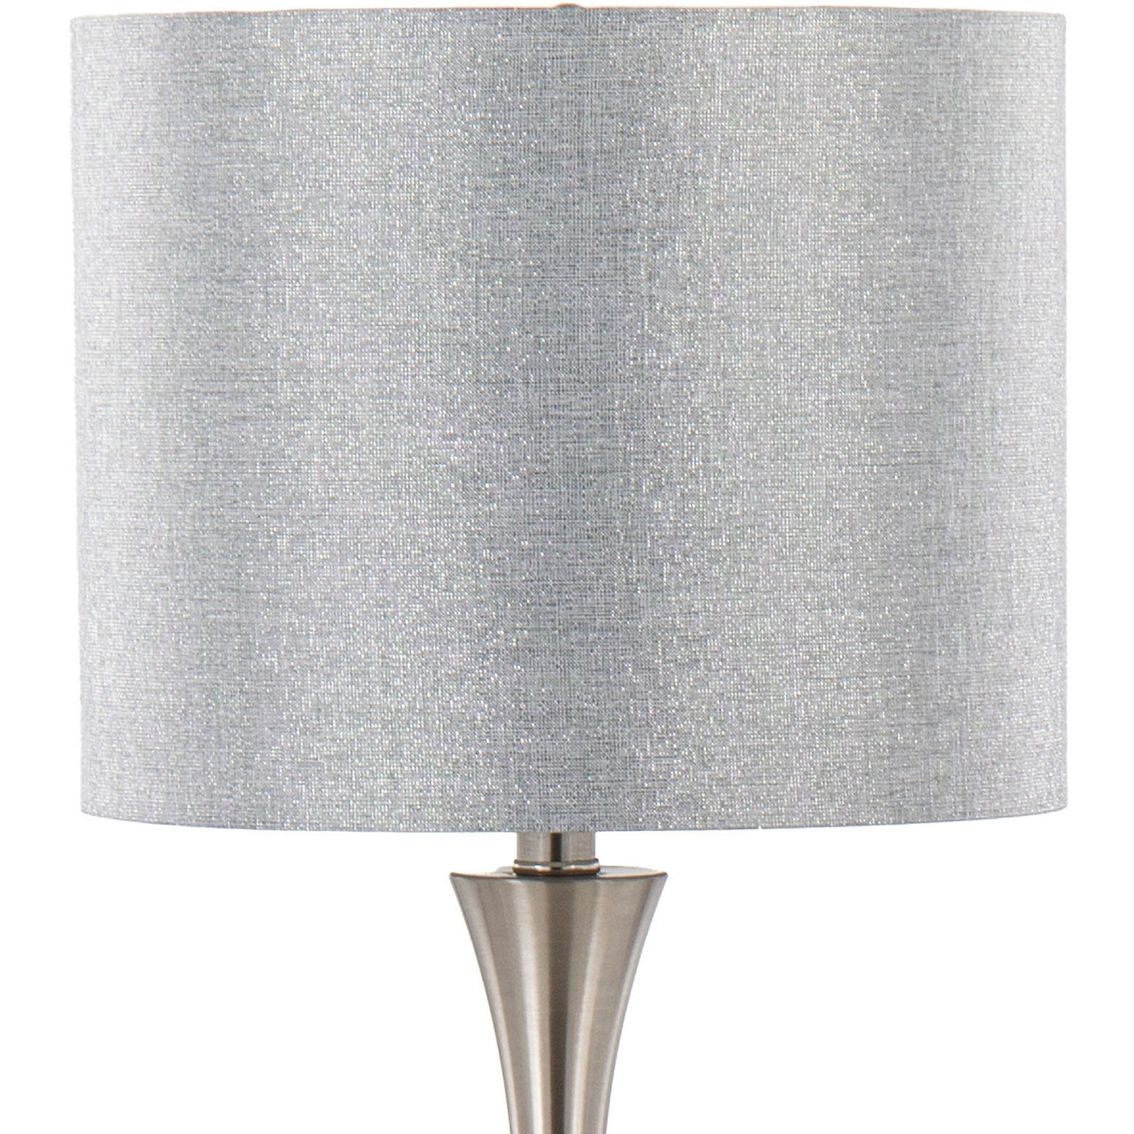 LumiSource Lenuxe 24.25 in. Metal Table Lamp 2 pk. - Image 5 of 9